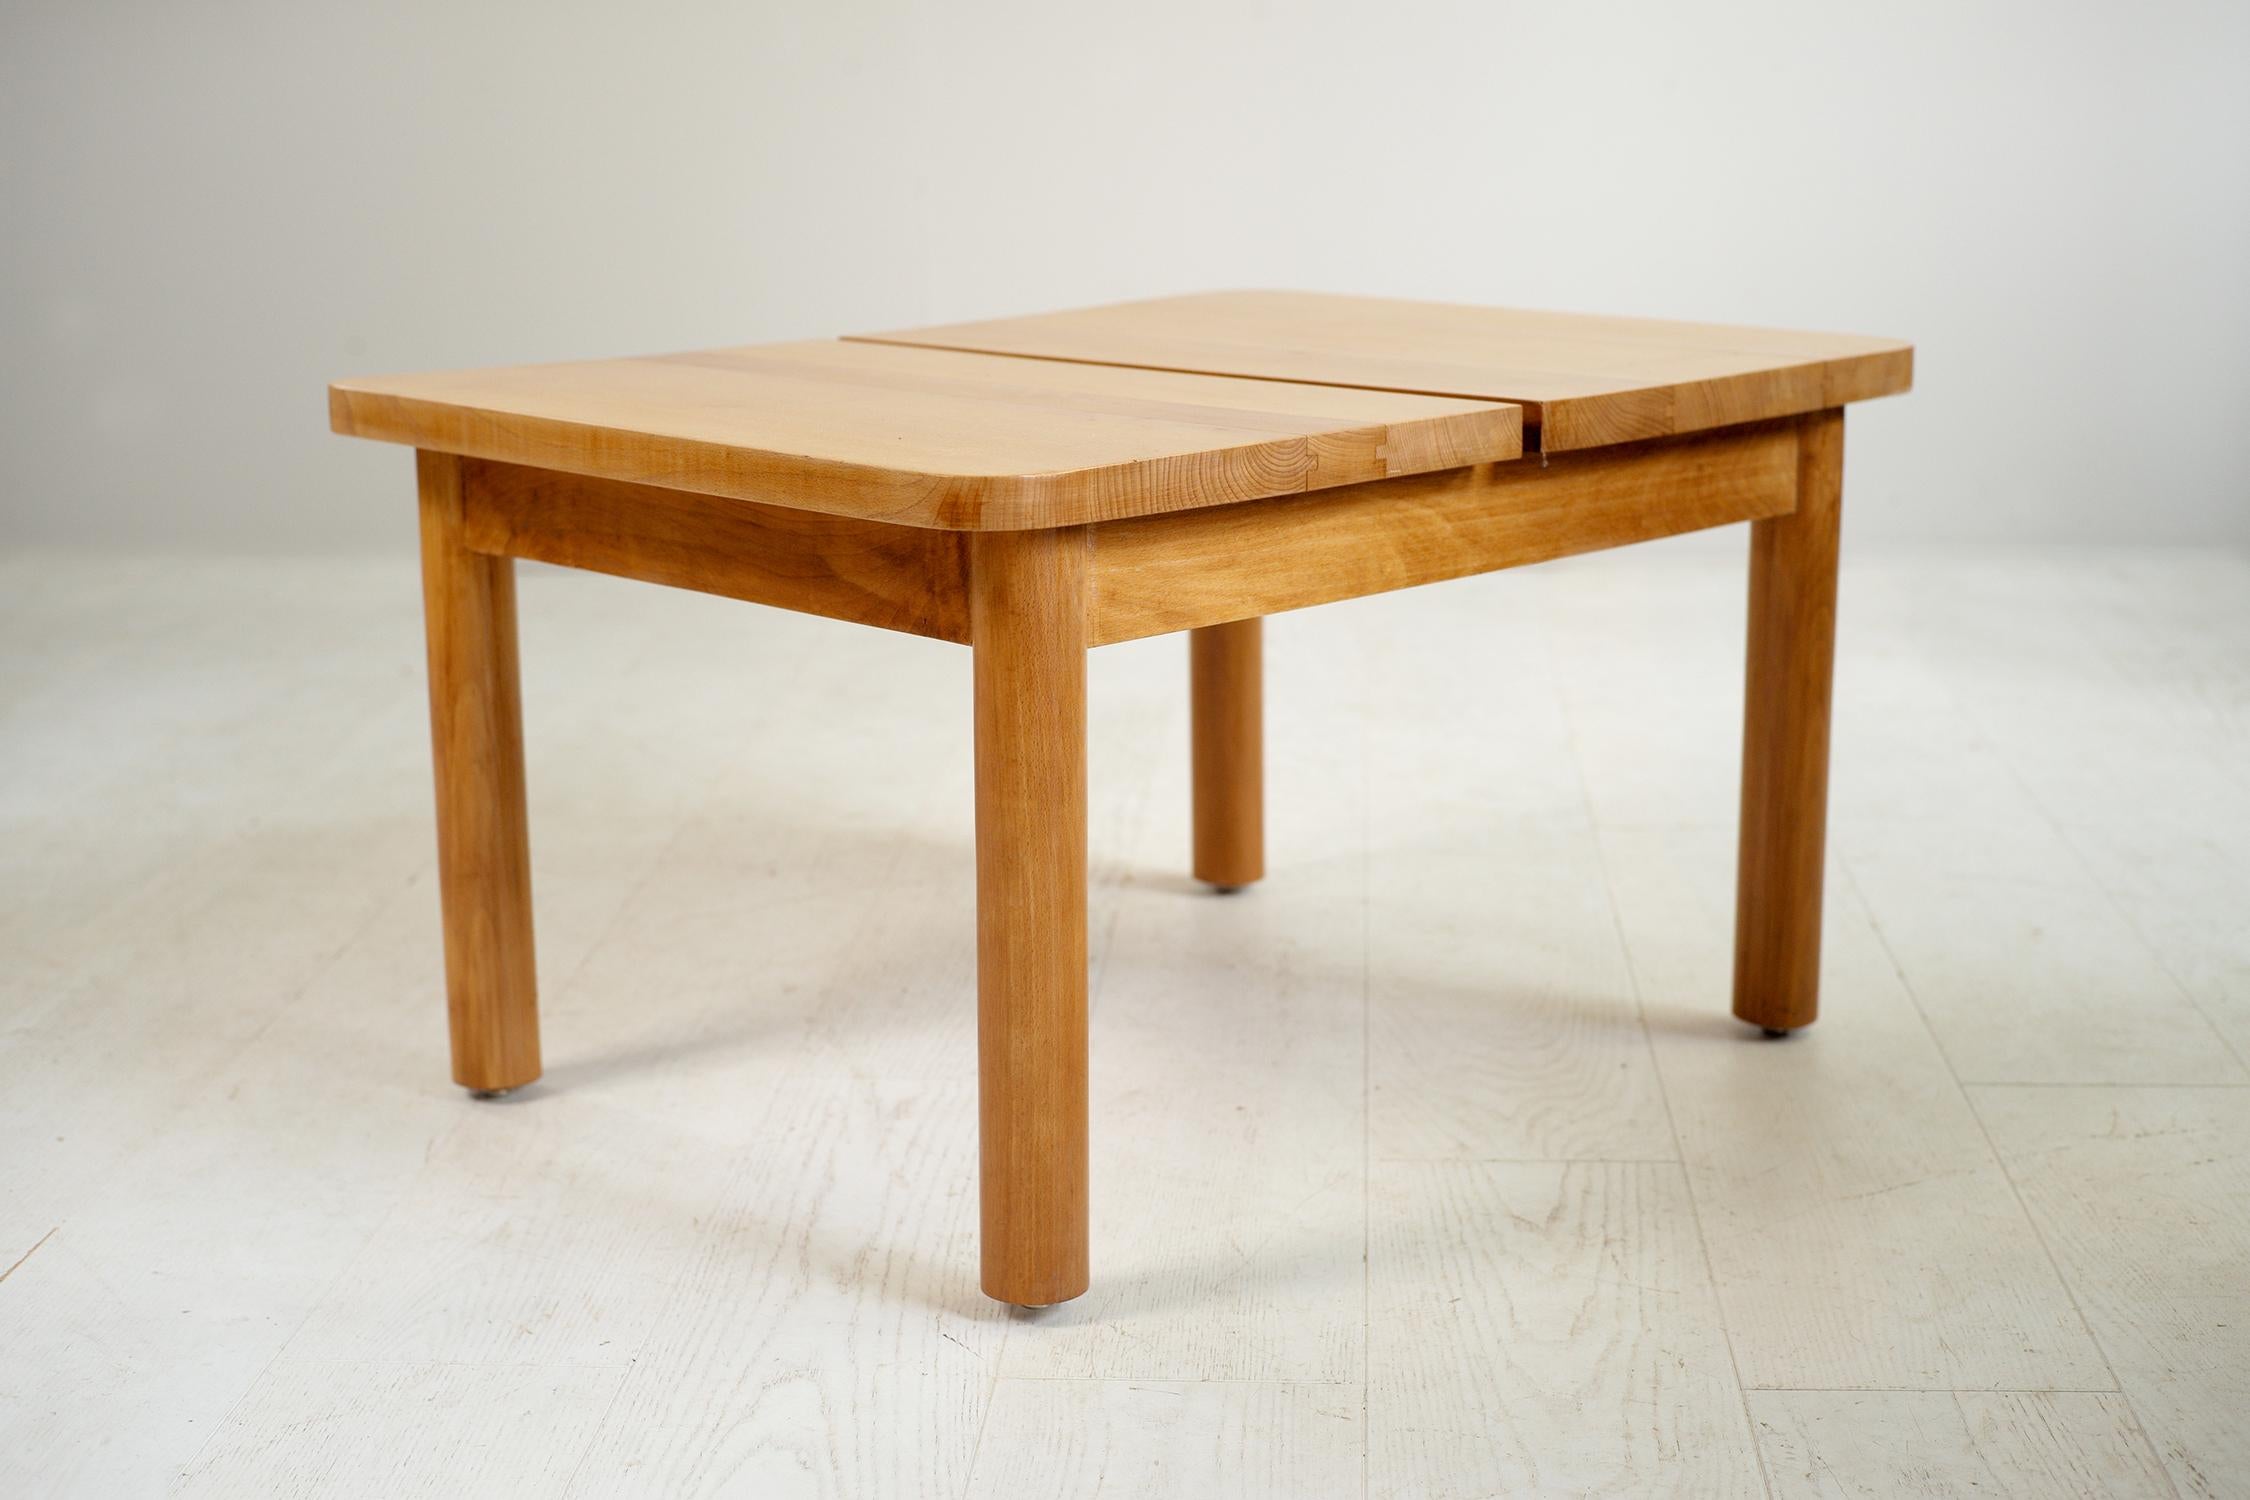 Pierre Gautier Delaye (1923-2006), rare pair of solid beech coffee tables, France, 1955. The rectangular openwork top in the middle rests on 4 log legs joined by crossbars. Like Charlotte Perriand, or previously Jacques Henry Le Même, Pierre Gautier